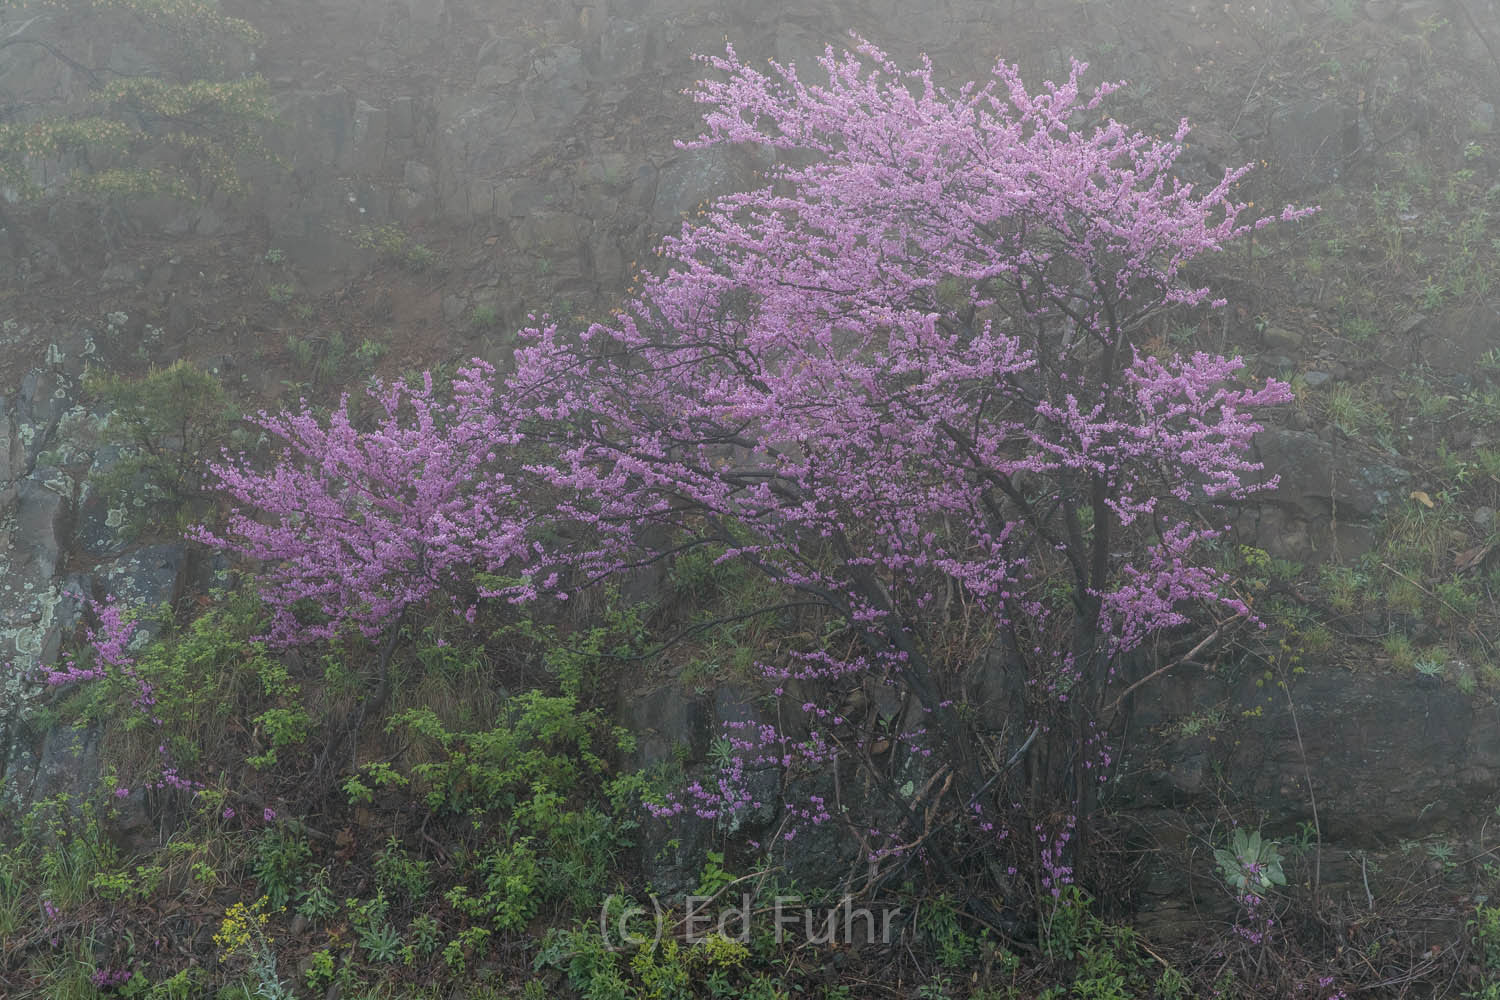 A grove of redbuds in the fog of an approaching spring rain.